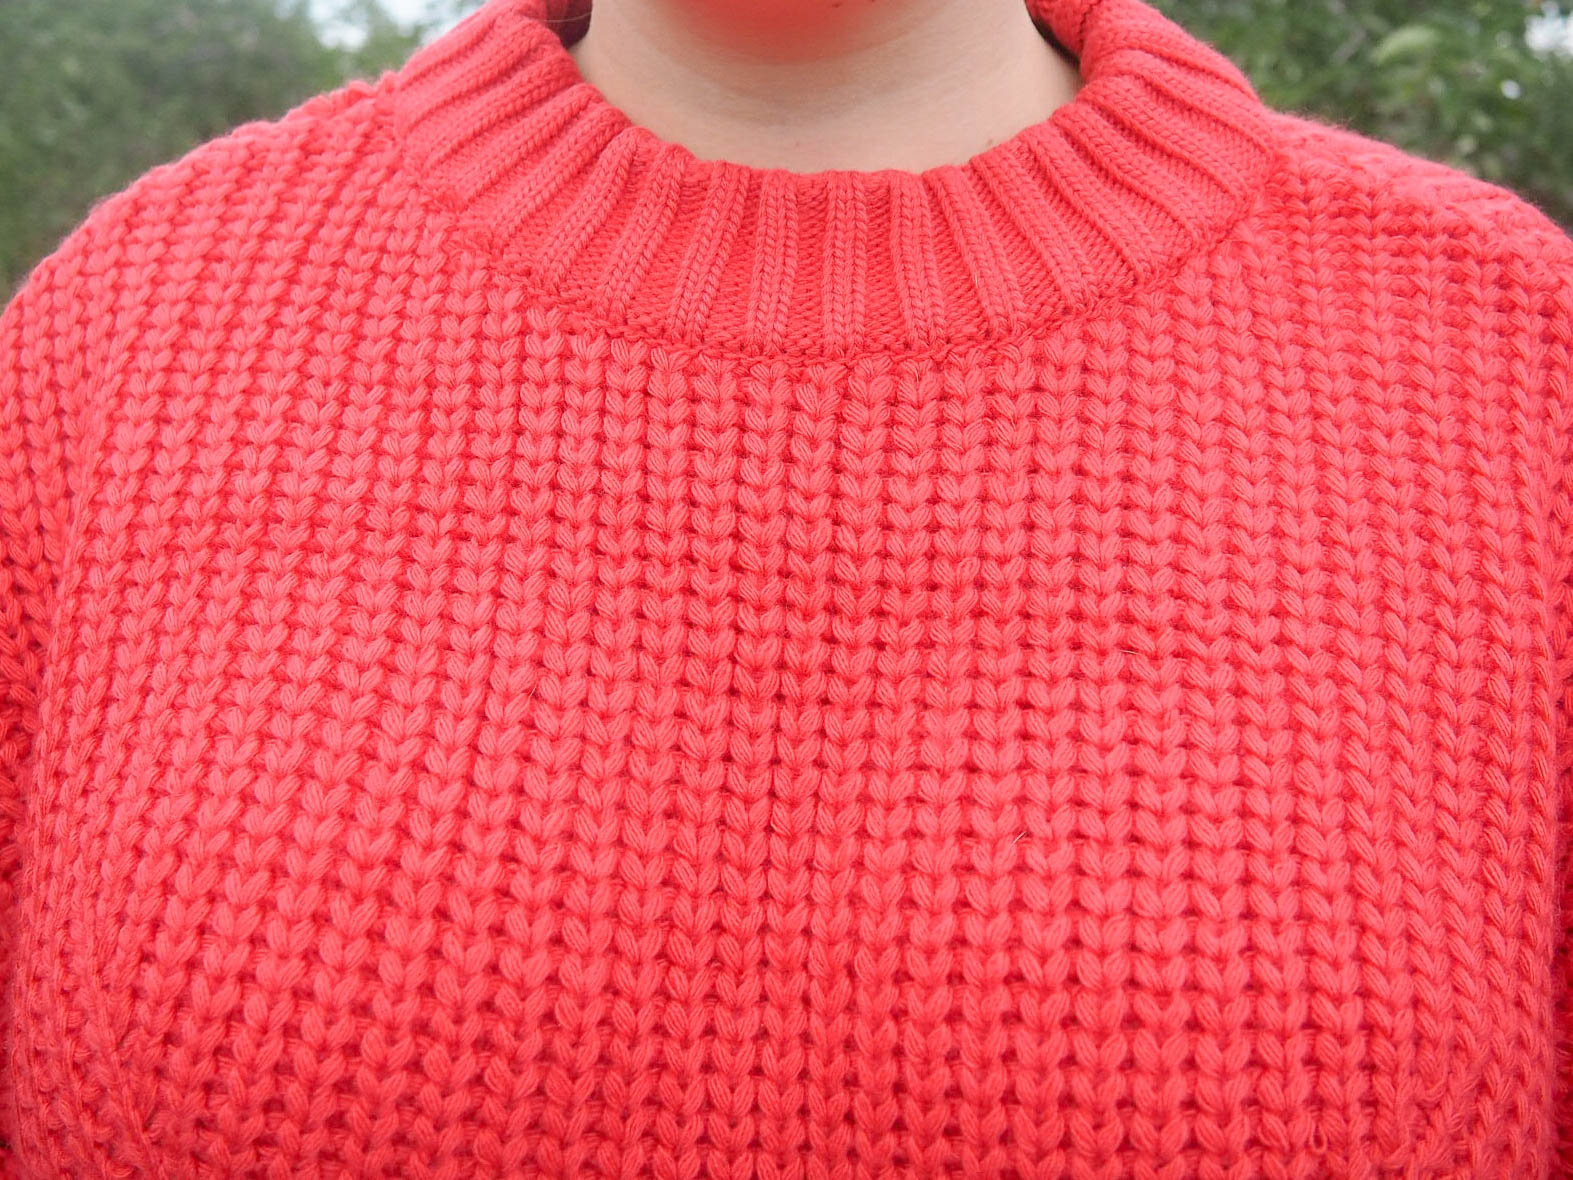 APPLE OF MY EYE || CANDY APPLE RED SWEATER OOTD - Lifestyles of Emily